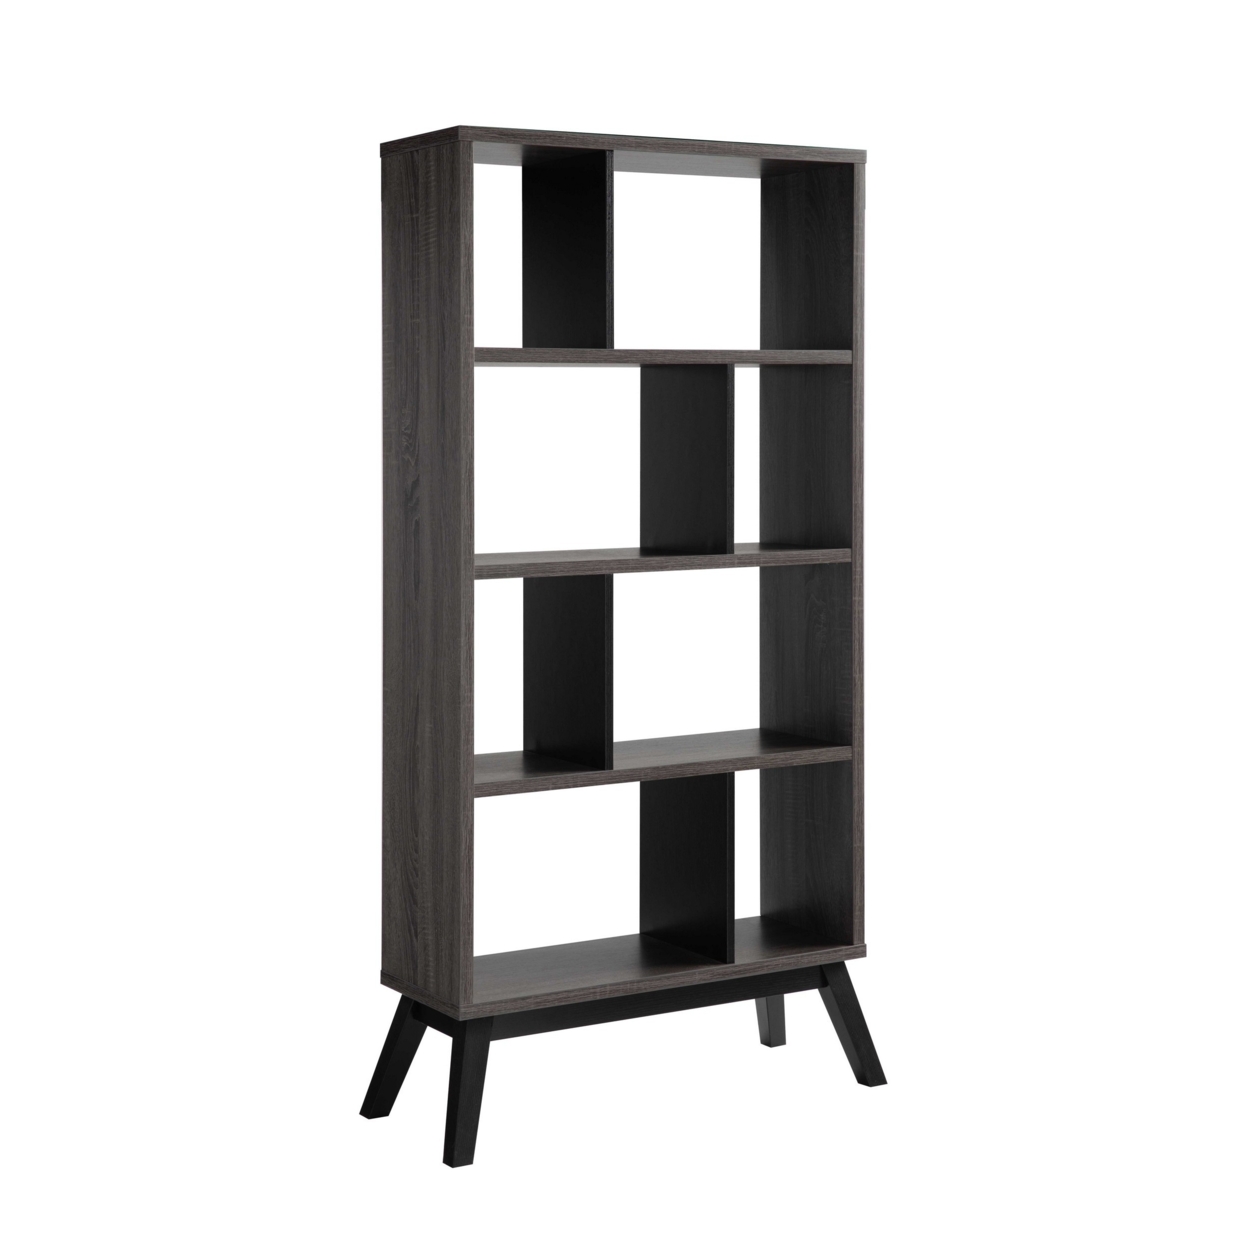 65 Inch Modern Bookcase, Four Shelves With Dividers, Flared Legs, Gray- Saltoro Sherpi